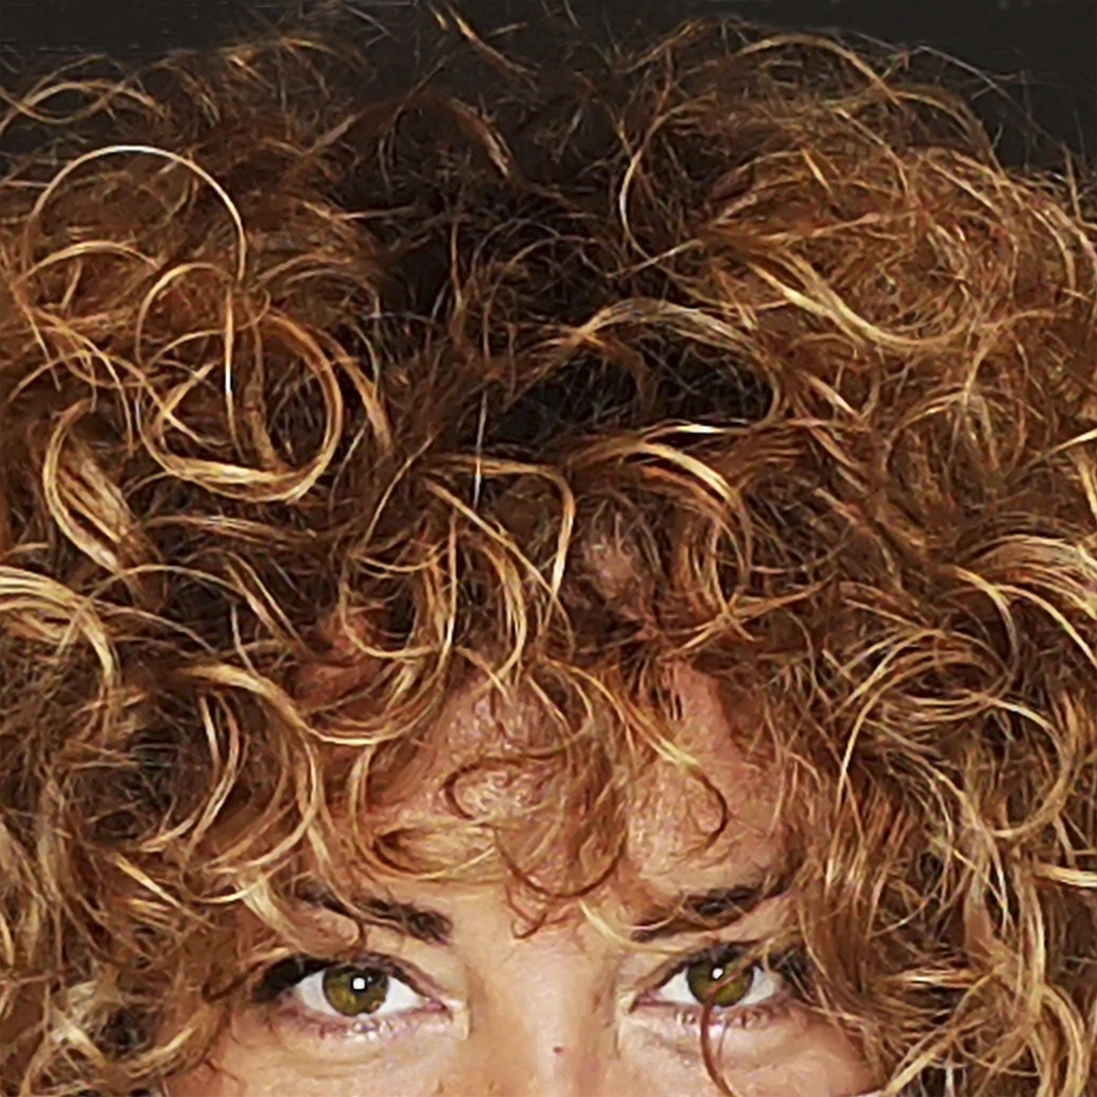 Perruqueria LeLook Sabadell: Curly Babylights